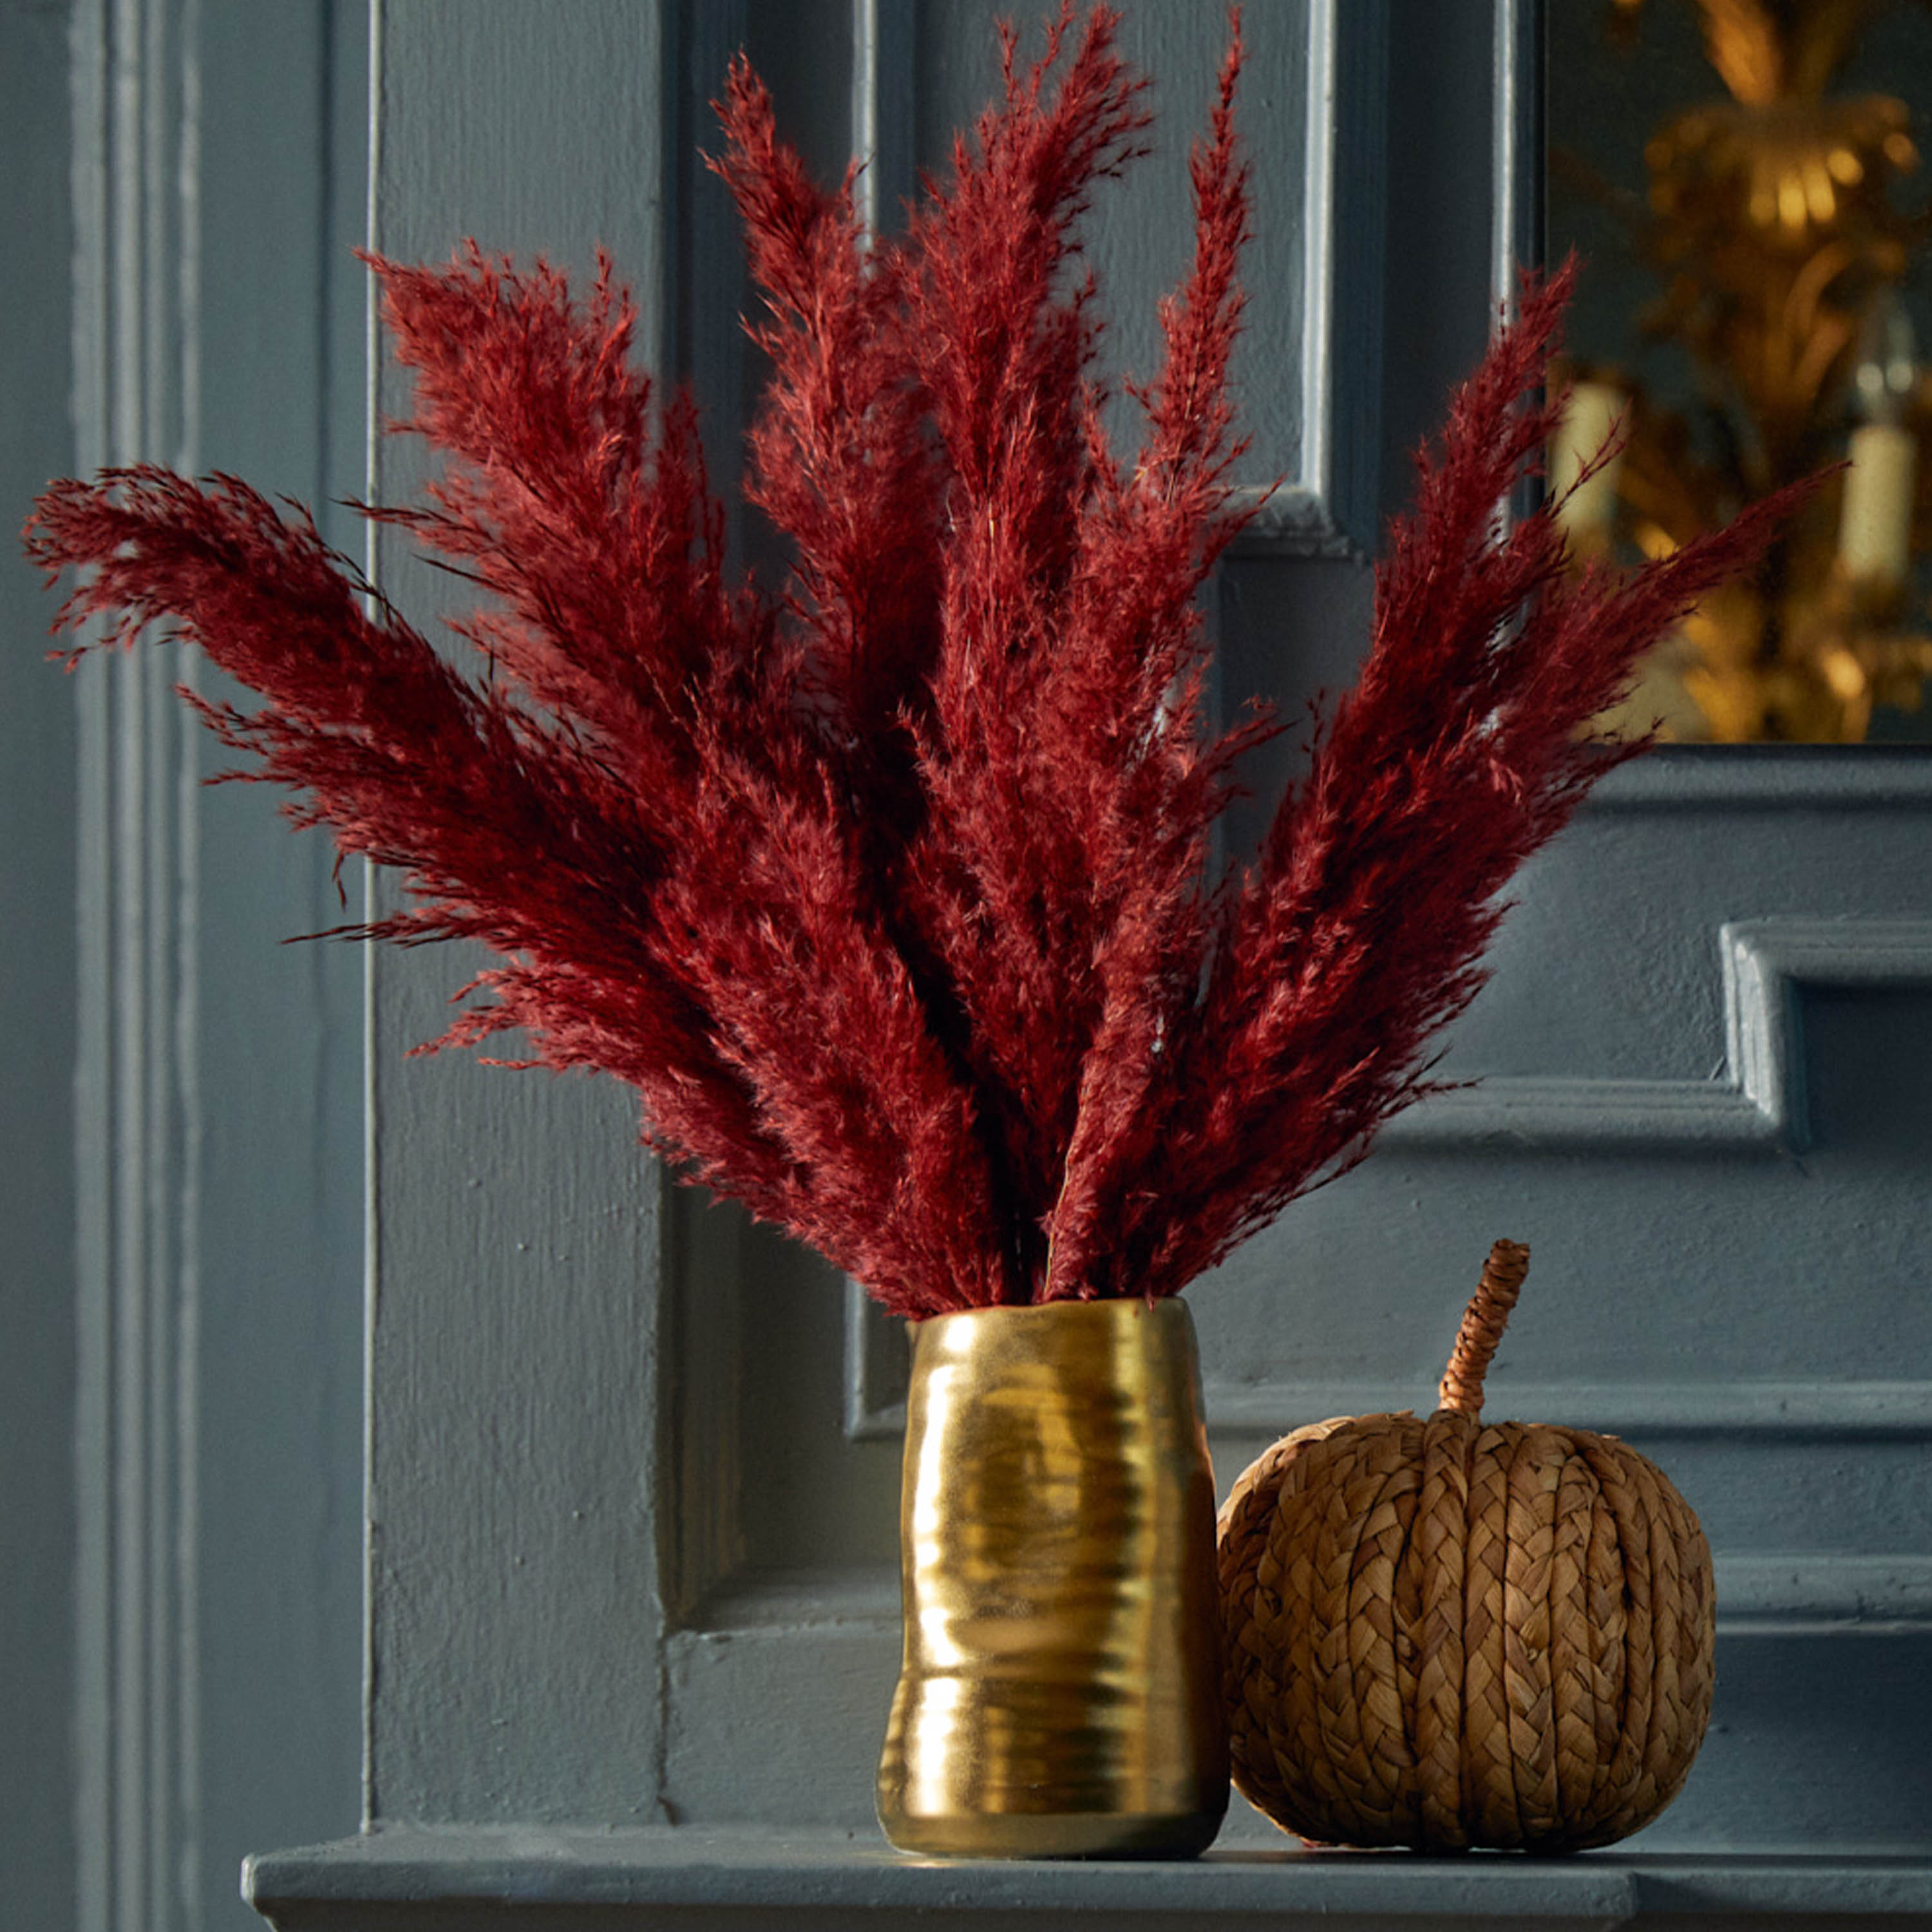 Dyed red pampas grass